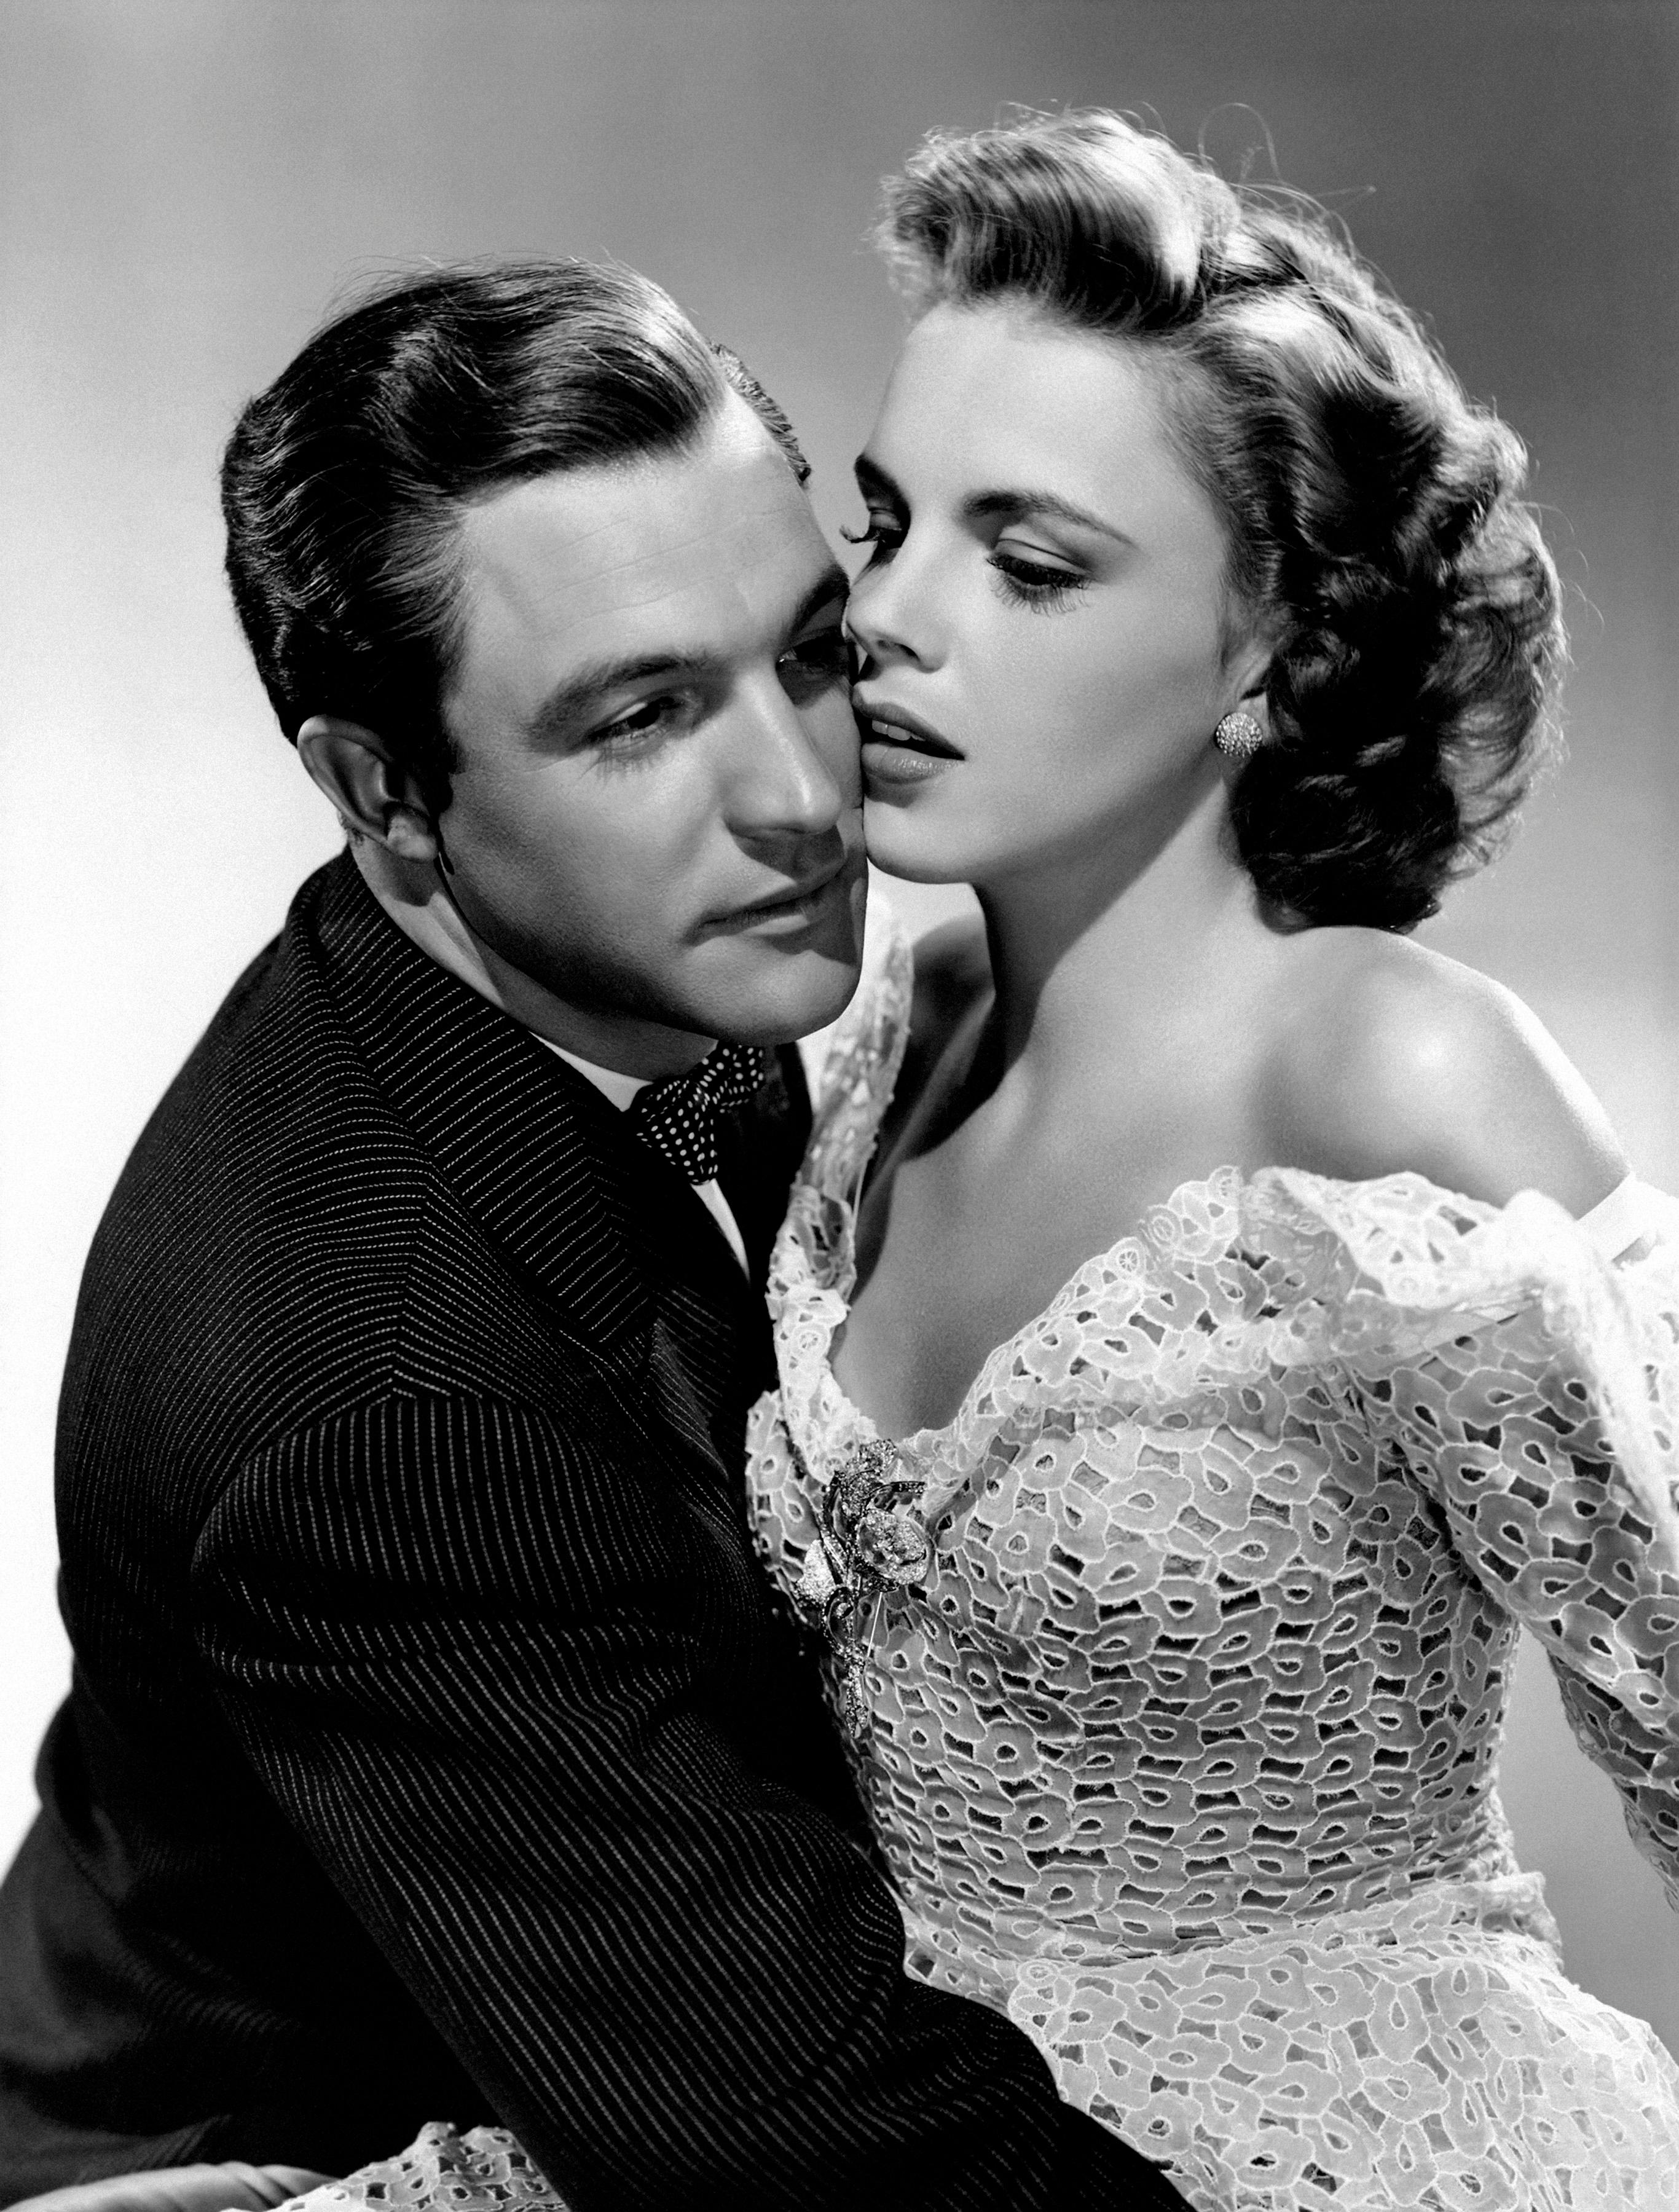 Unknown Portrait Photograph - Gene Kelly and Judy Garland "For Me and My Gal" Globe Photos Fine Art Print